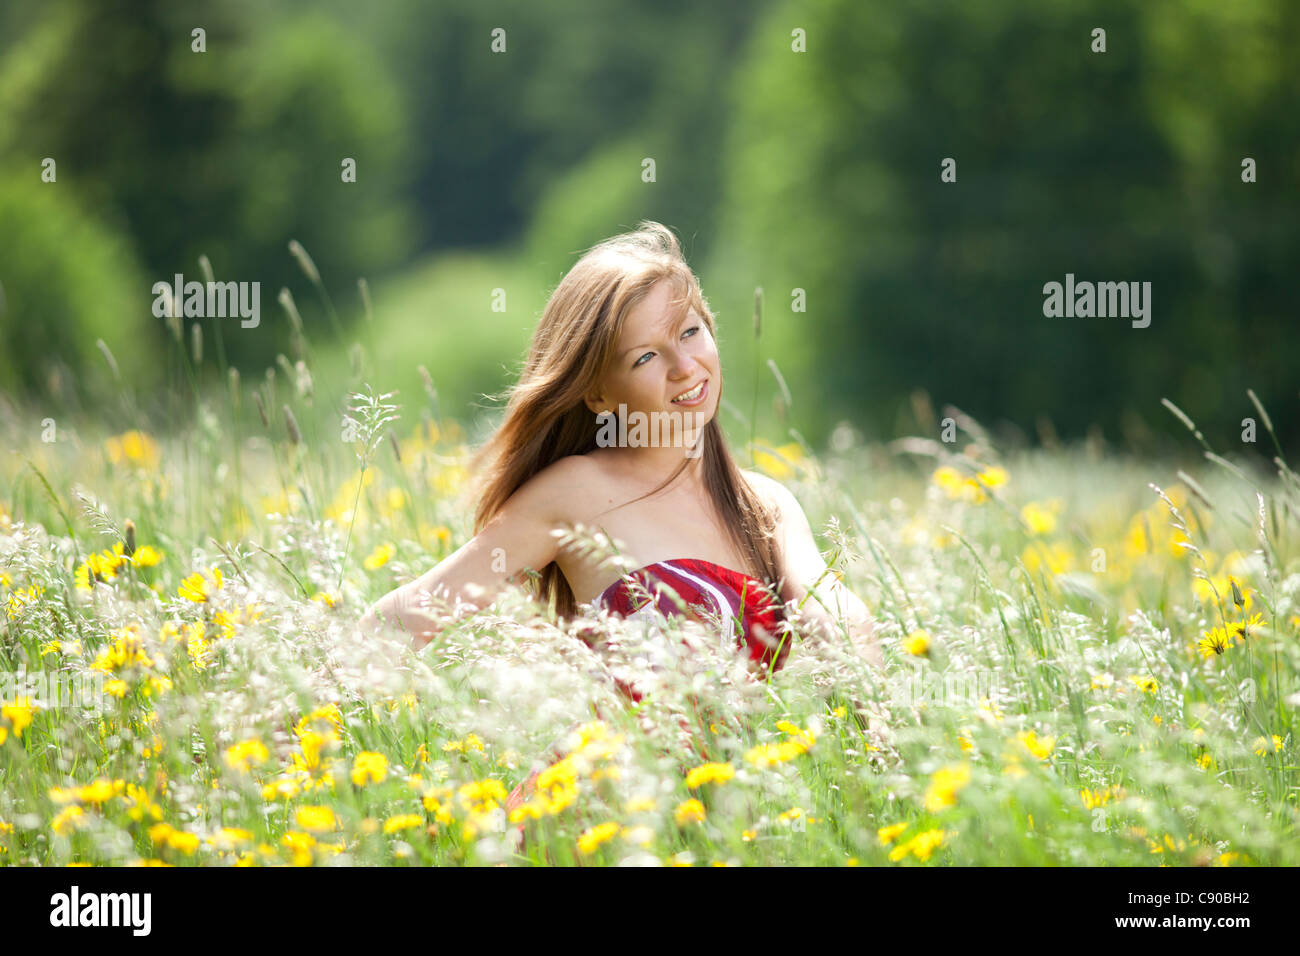 Optimistic glance of a young woman Stock Photo